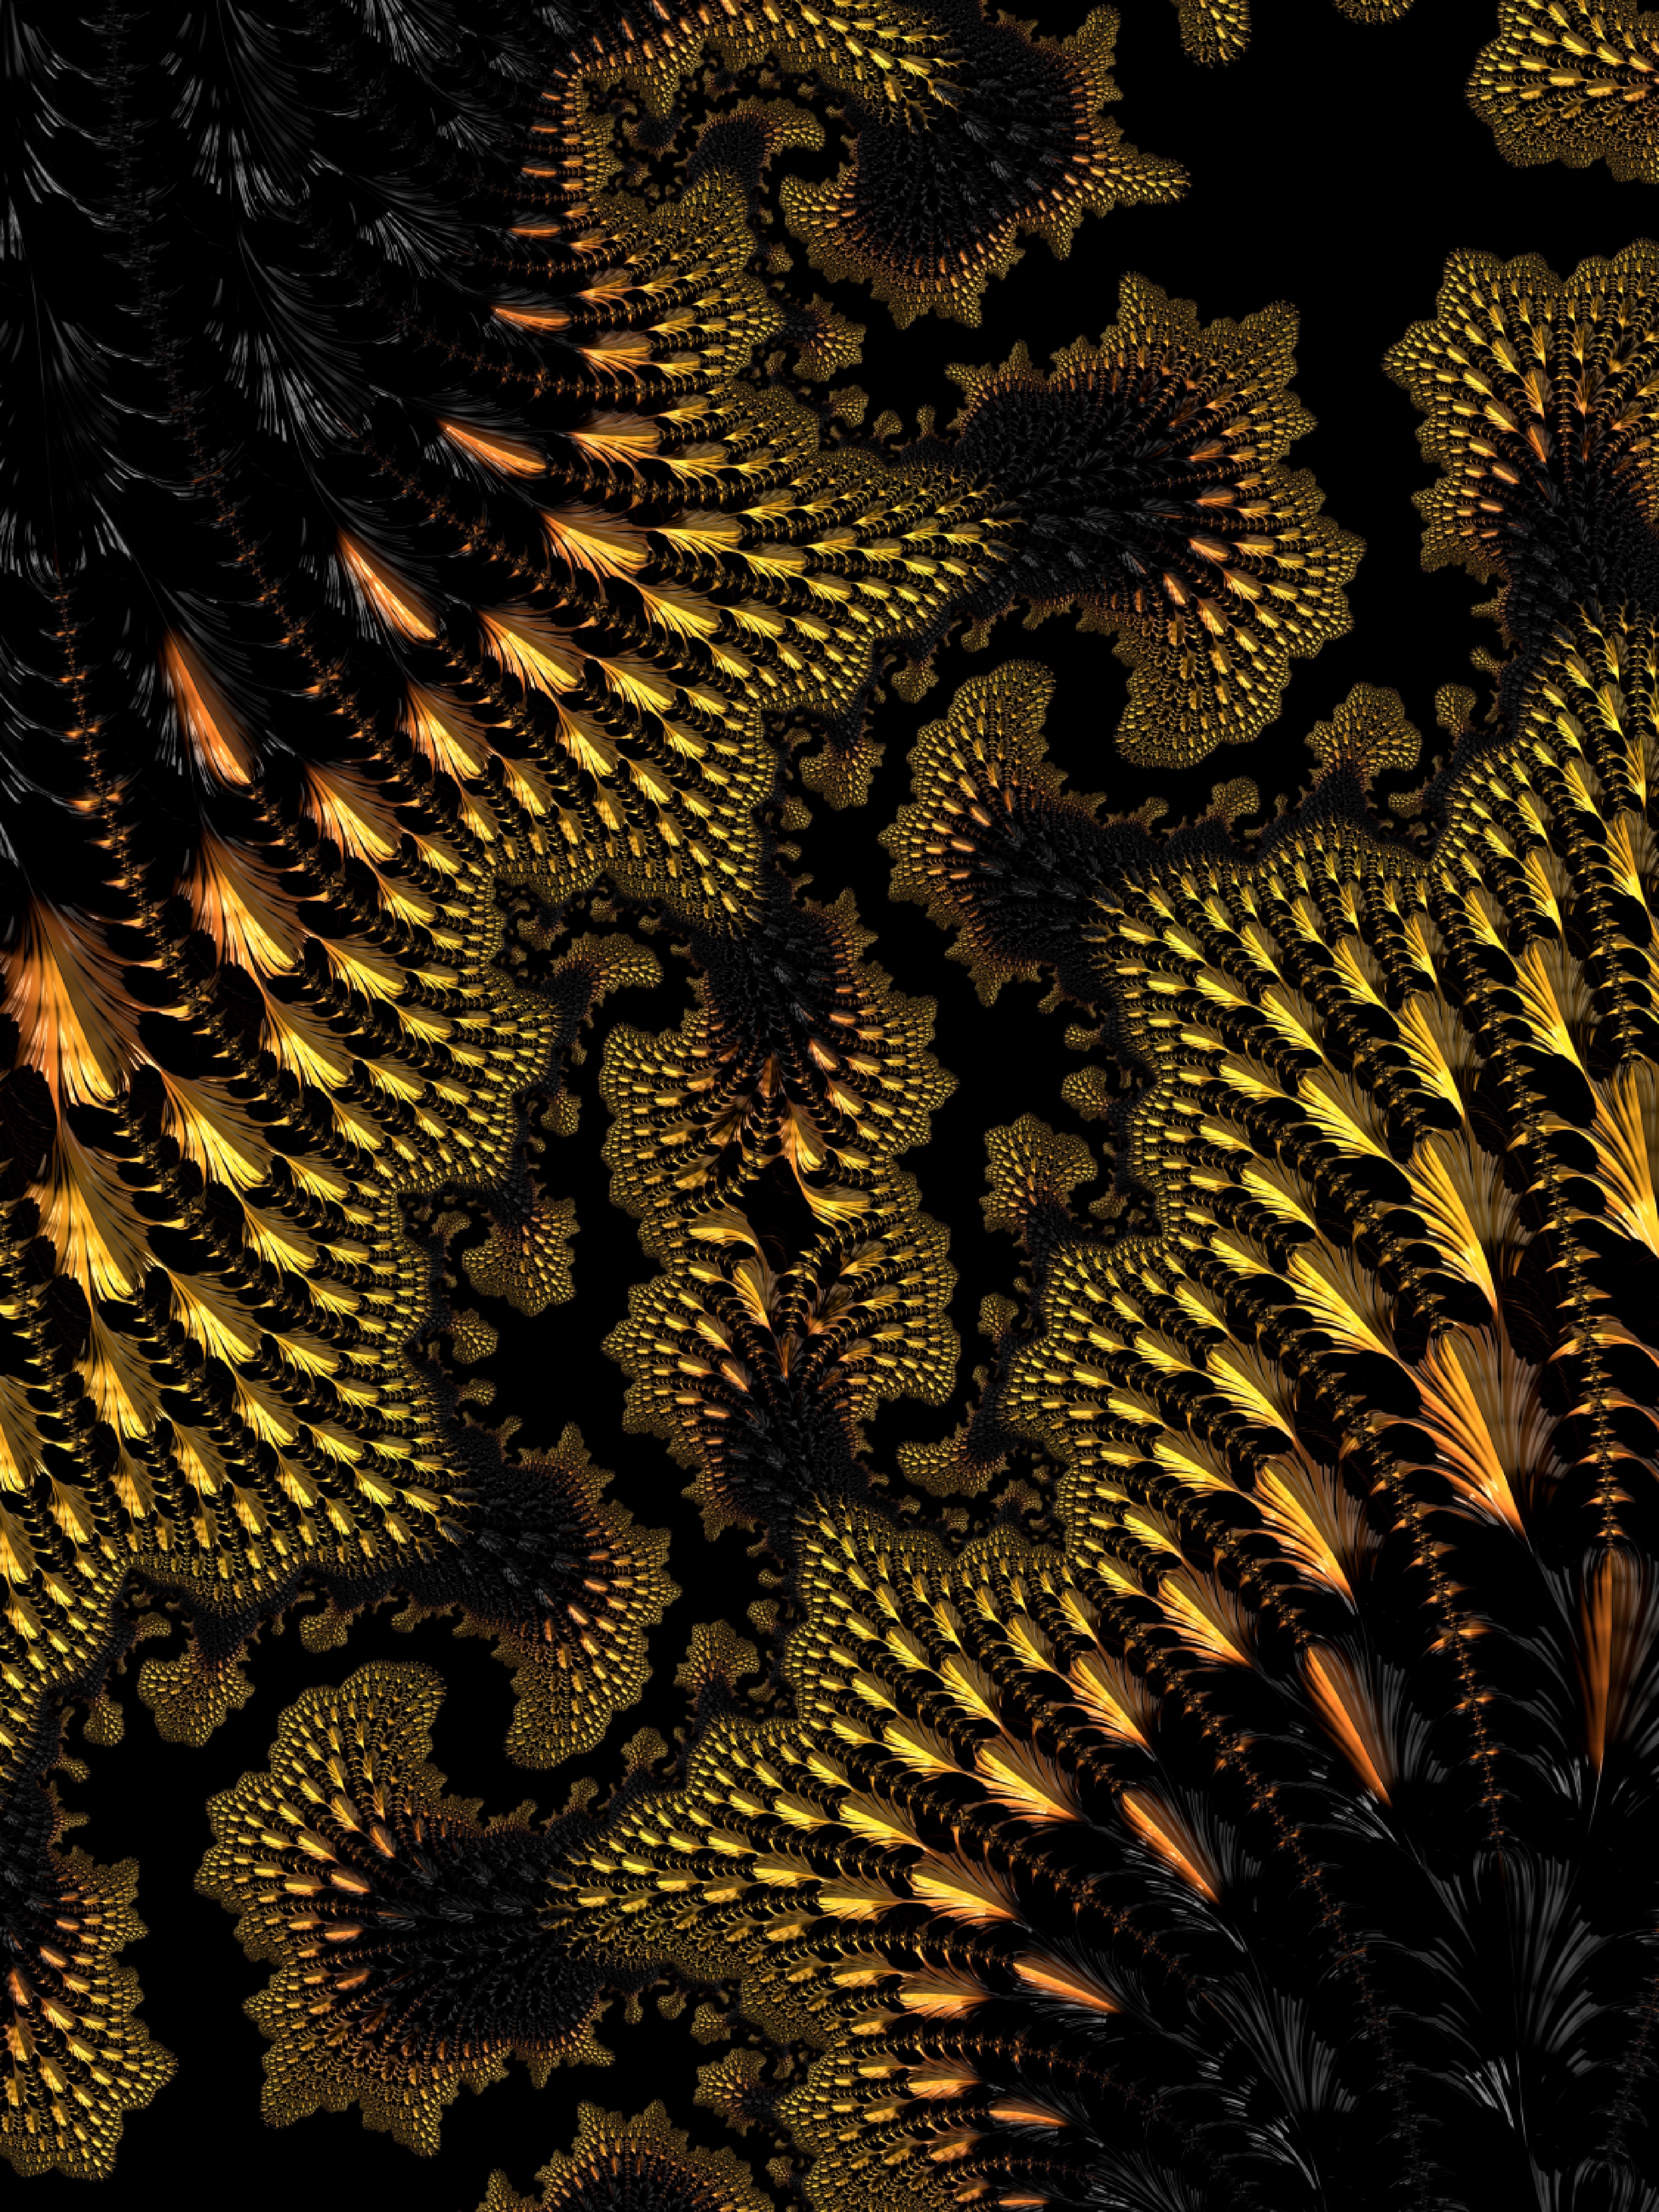 fractal, 3d, abstract, black, yellow, winding, sinuous, ornate